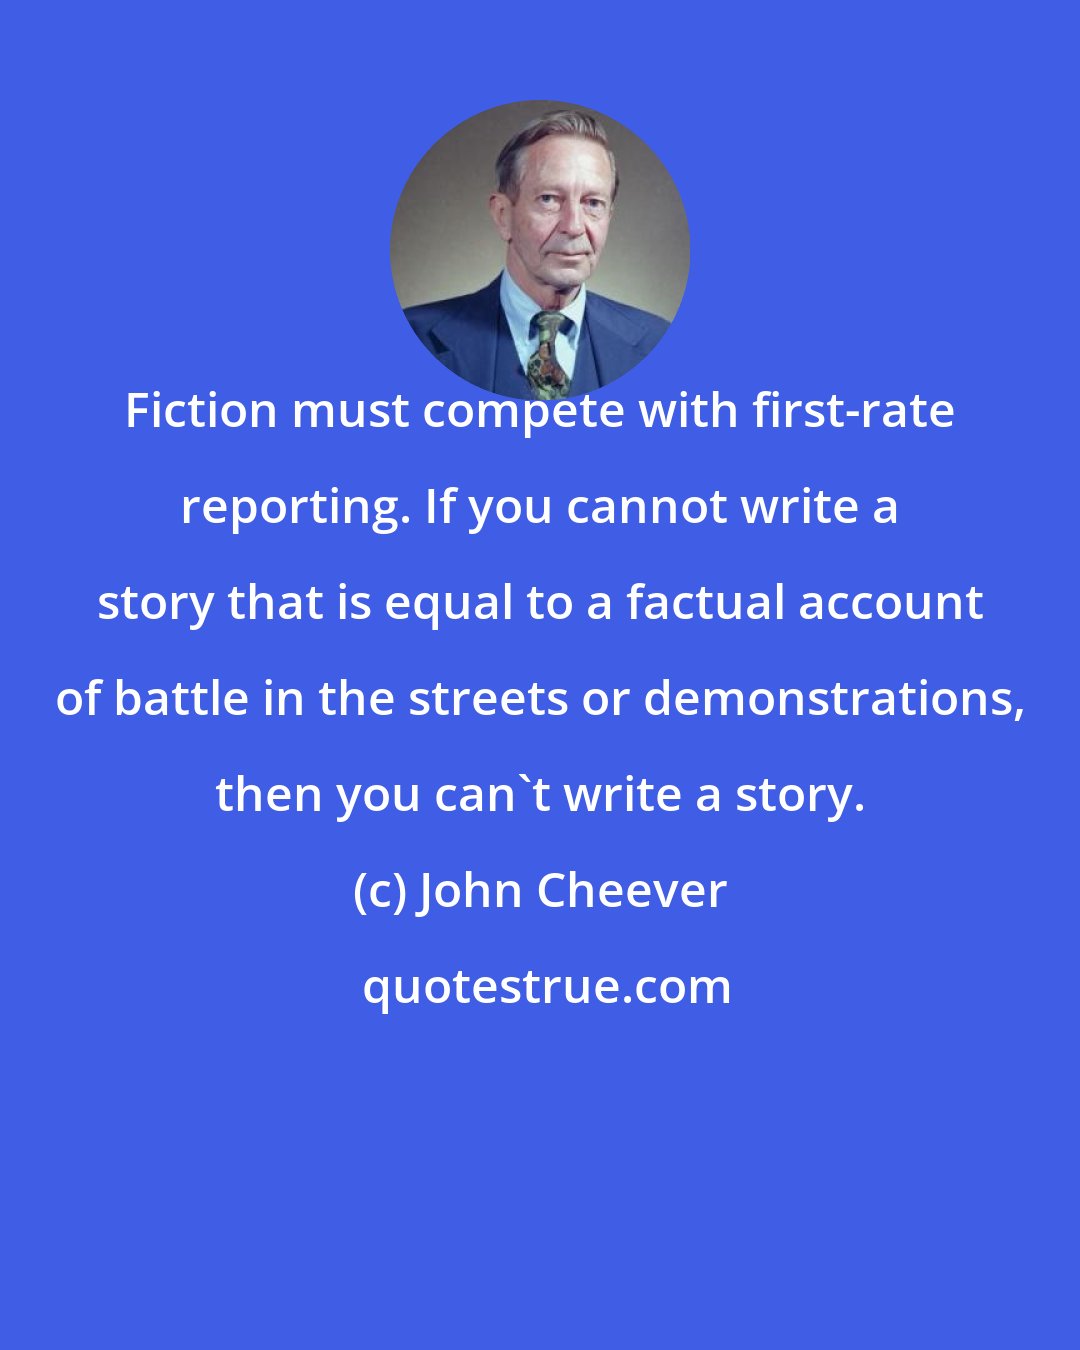 John Cheever: Fiction must compete with first-rate reporting. If you cannot write a story that is equal to a factual account of battle in the streets or demonstrations, then you can't write a story.